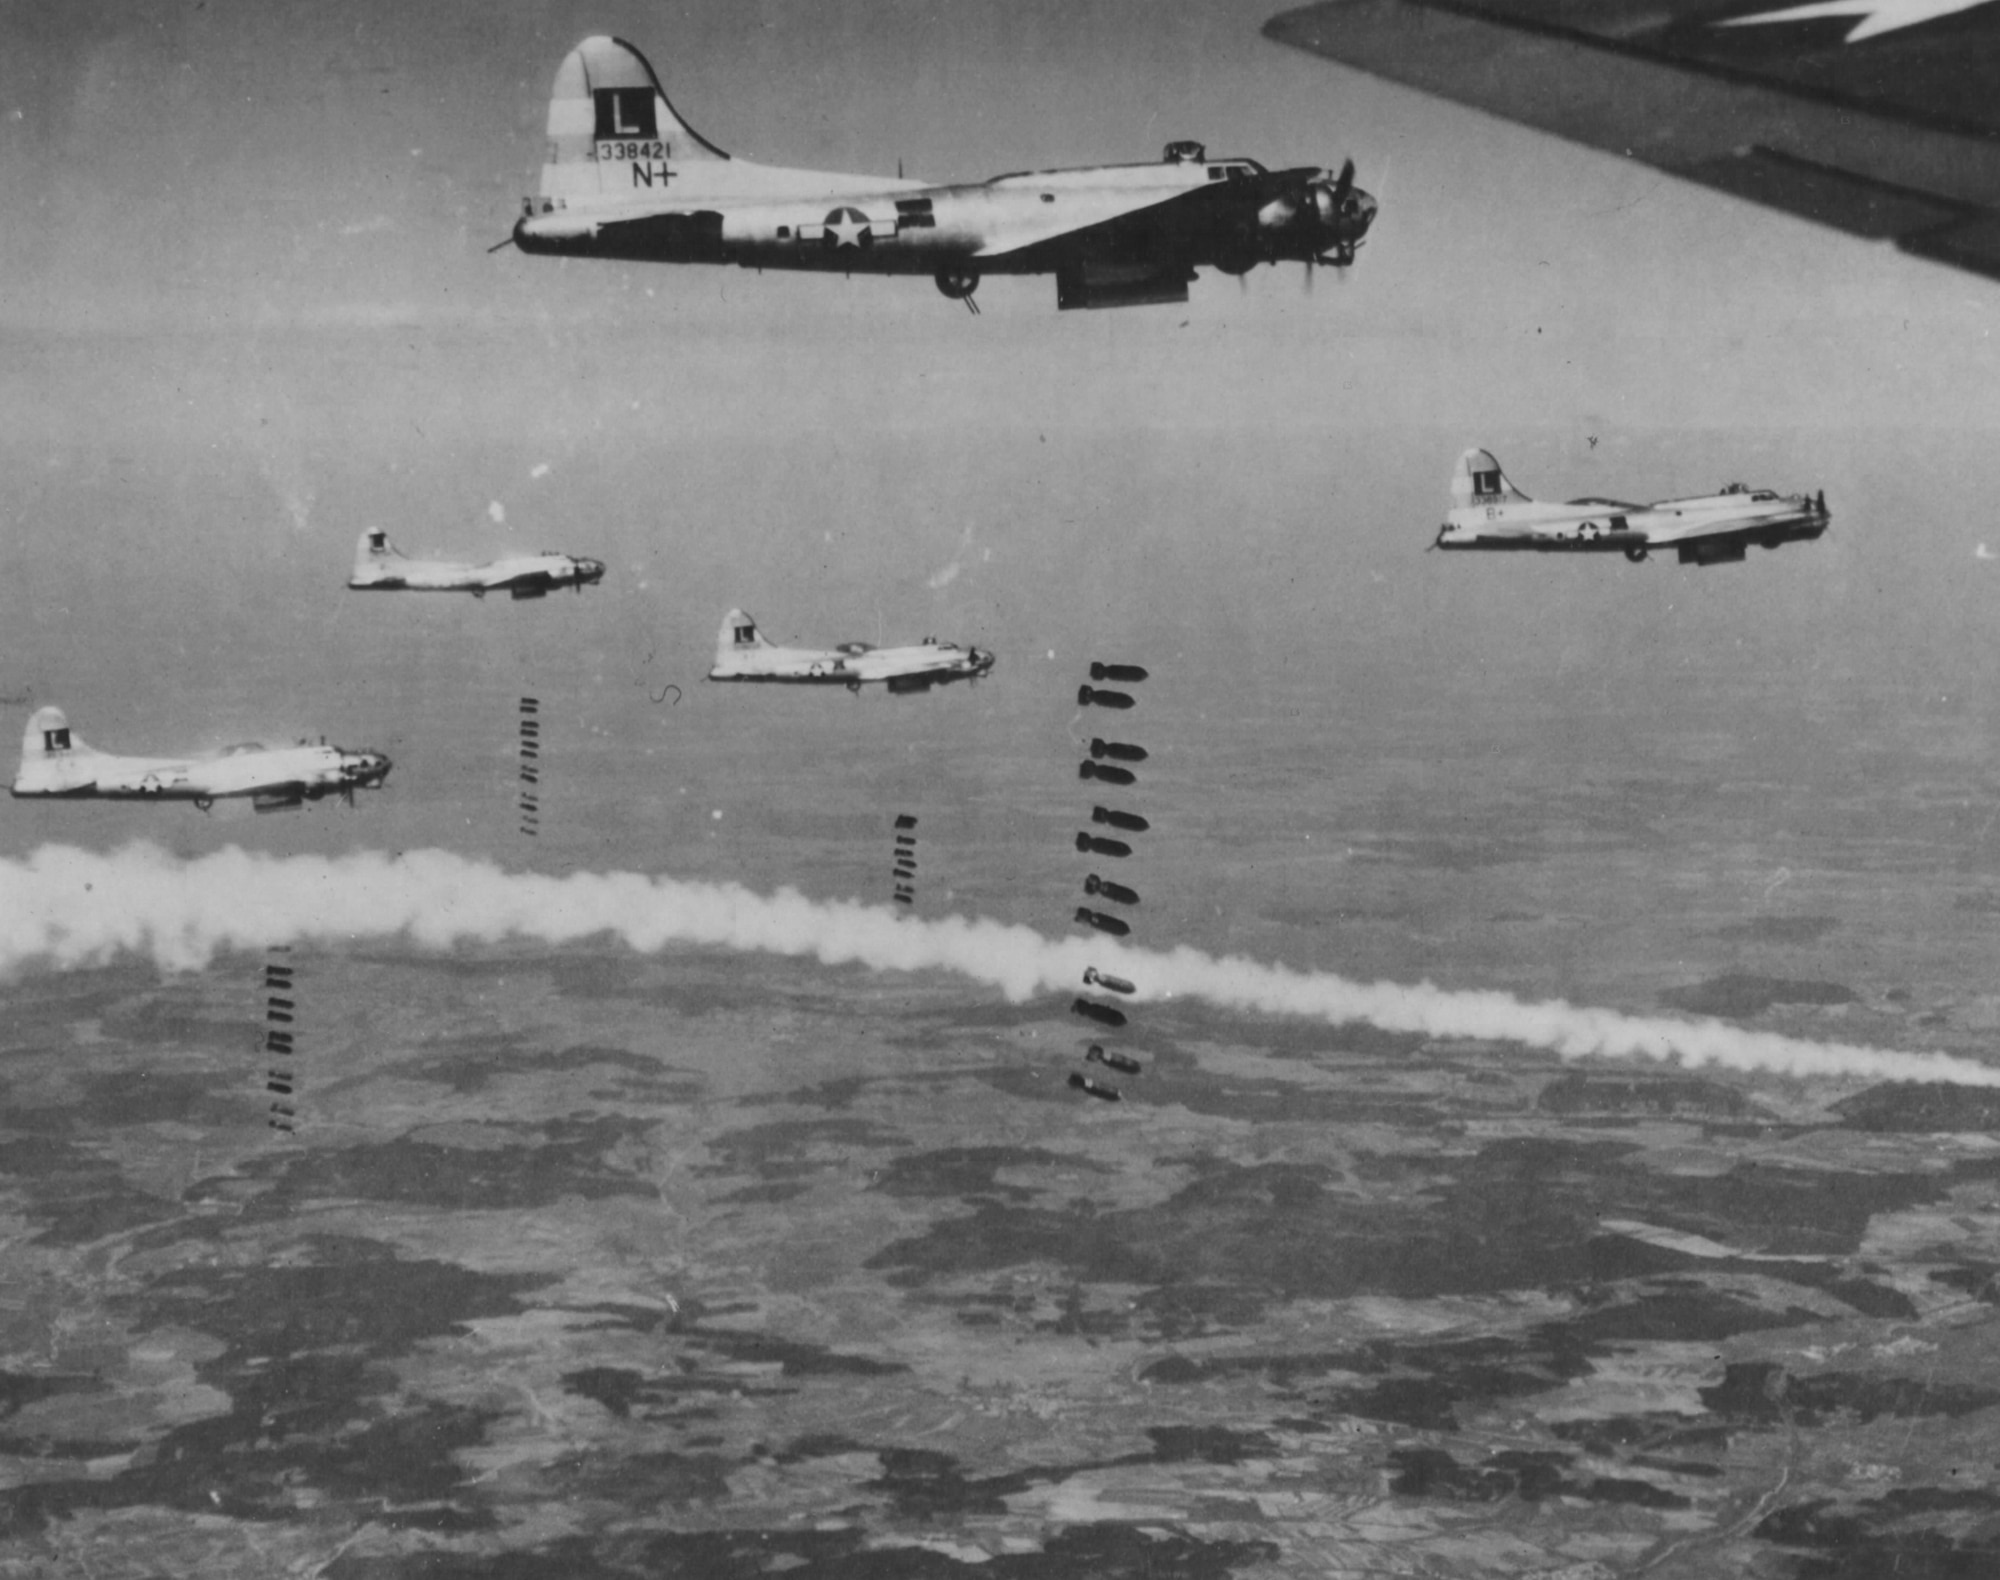 Eighth Air Force B-17s bombing the railroad yards in Donauworth, Germany, in April 1945.  The smoke is from a marker signaling the bomb drop.